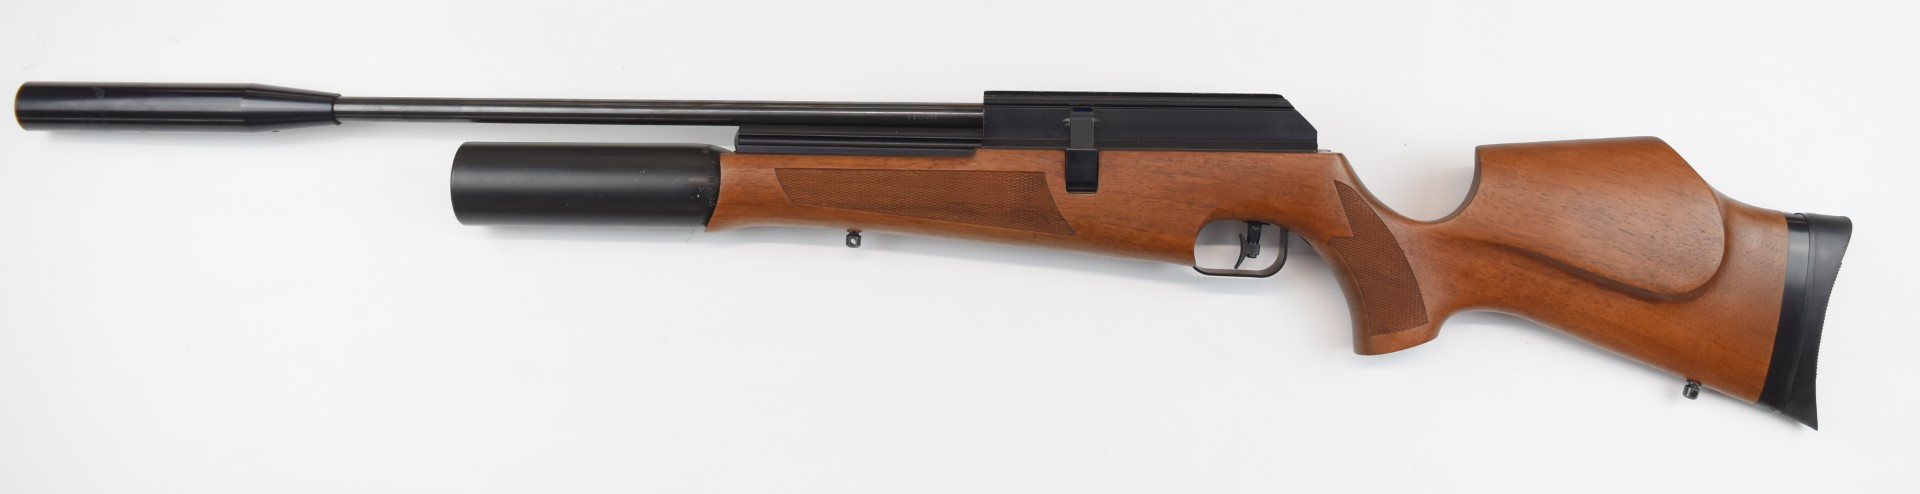 BSA .177 PCP air rifle with chequered semi-pistol grip and forend, sling mounts, adjustable - Image 12 of 19